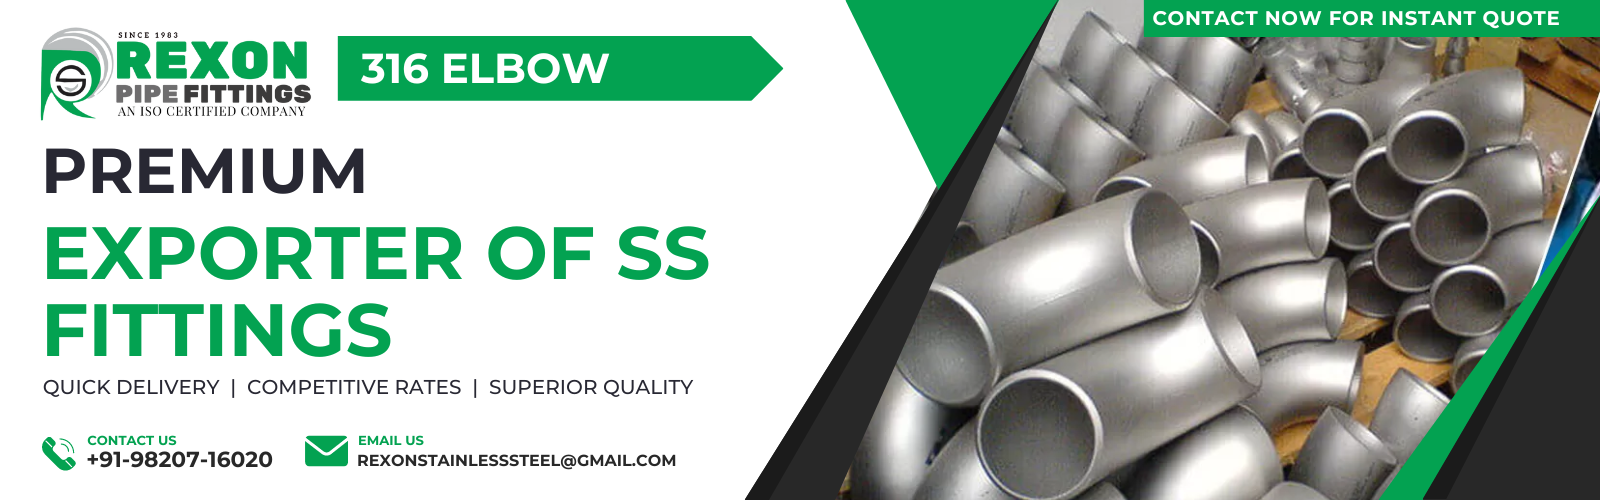 AISI 316/316L Stainless Steel ButtWelded Elbow Pipe Fitting Manufacturer